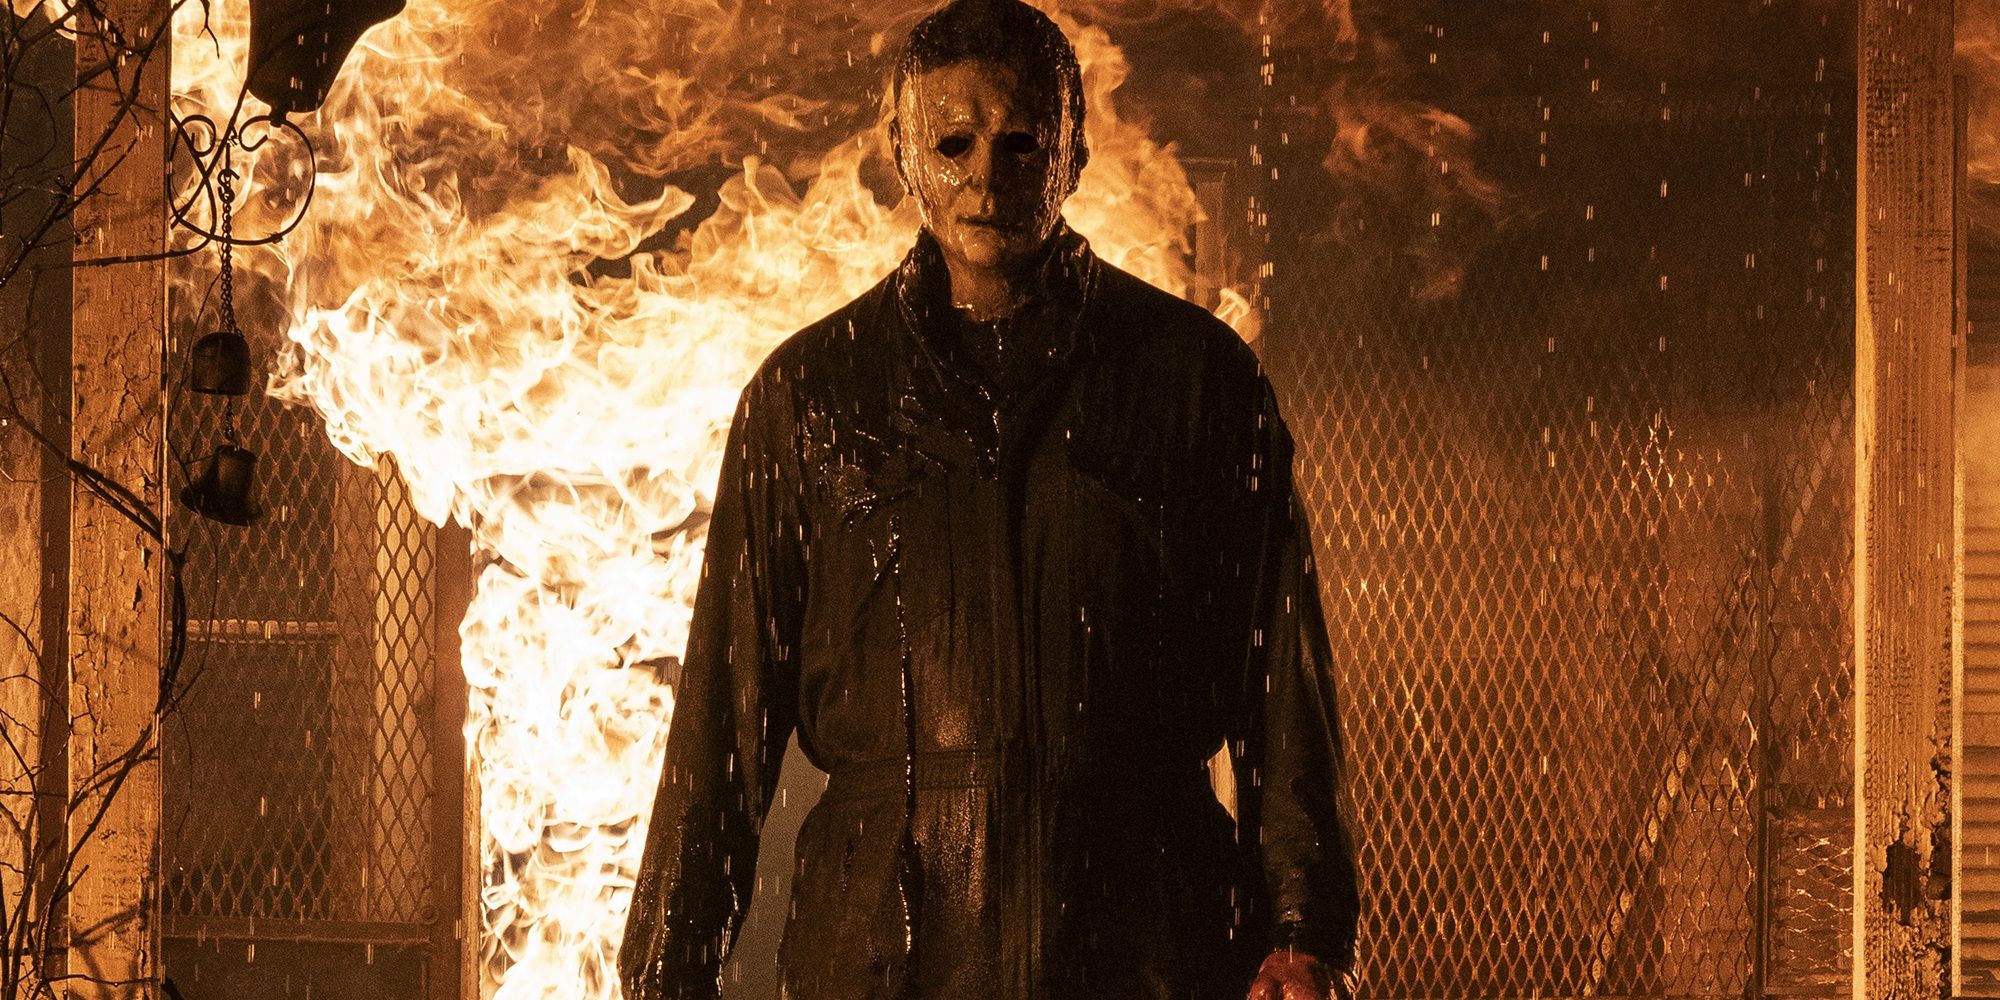 Michael Myers escapes from a burning house in Halloween Kills